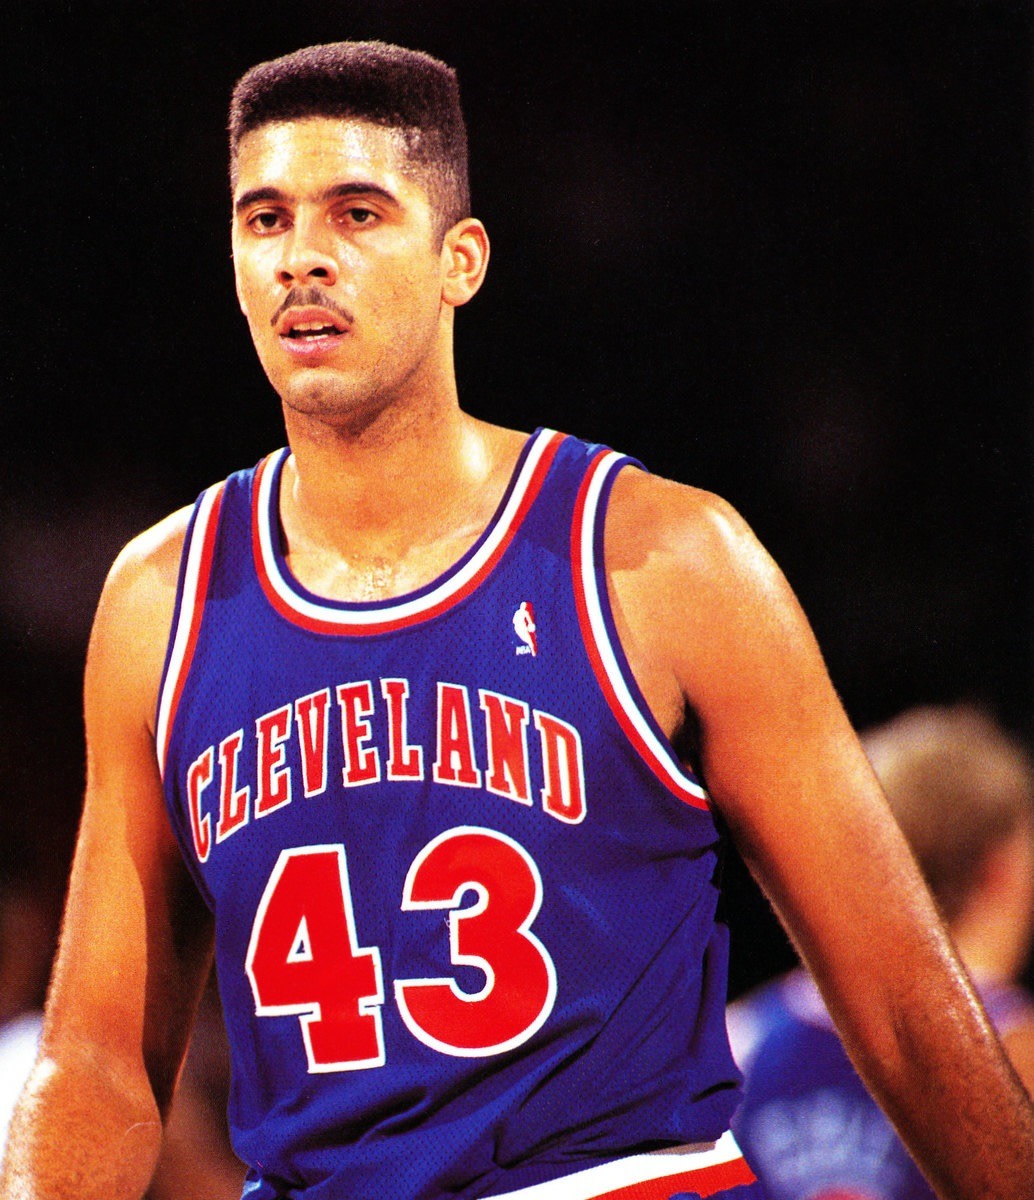 Brad Daugherty anchored the middle for the Cleveland Cavaliers in his short NBA career.